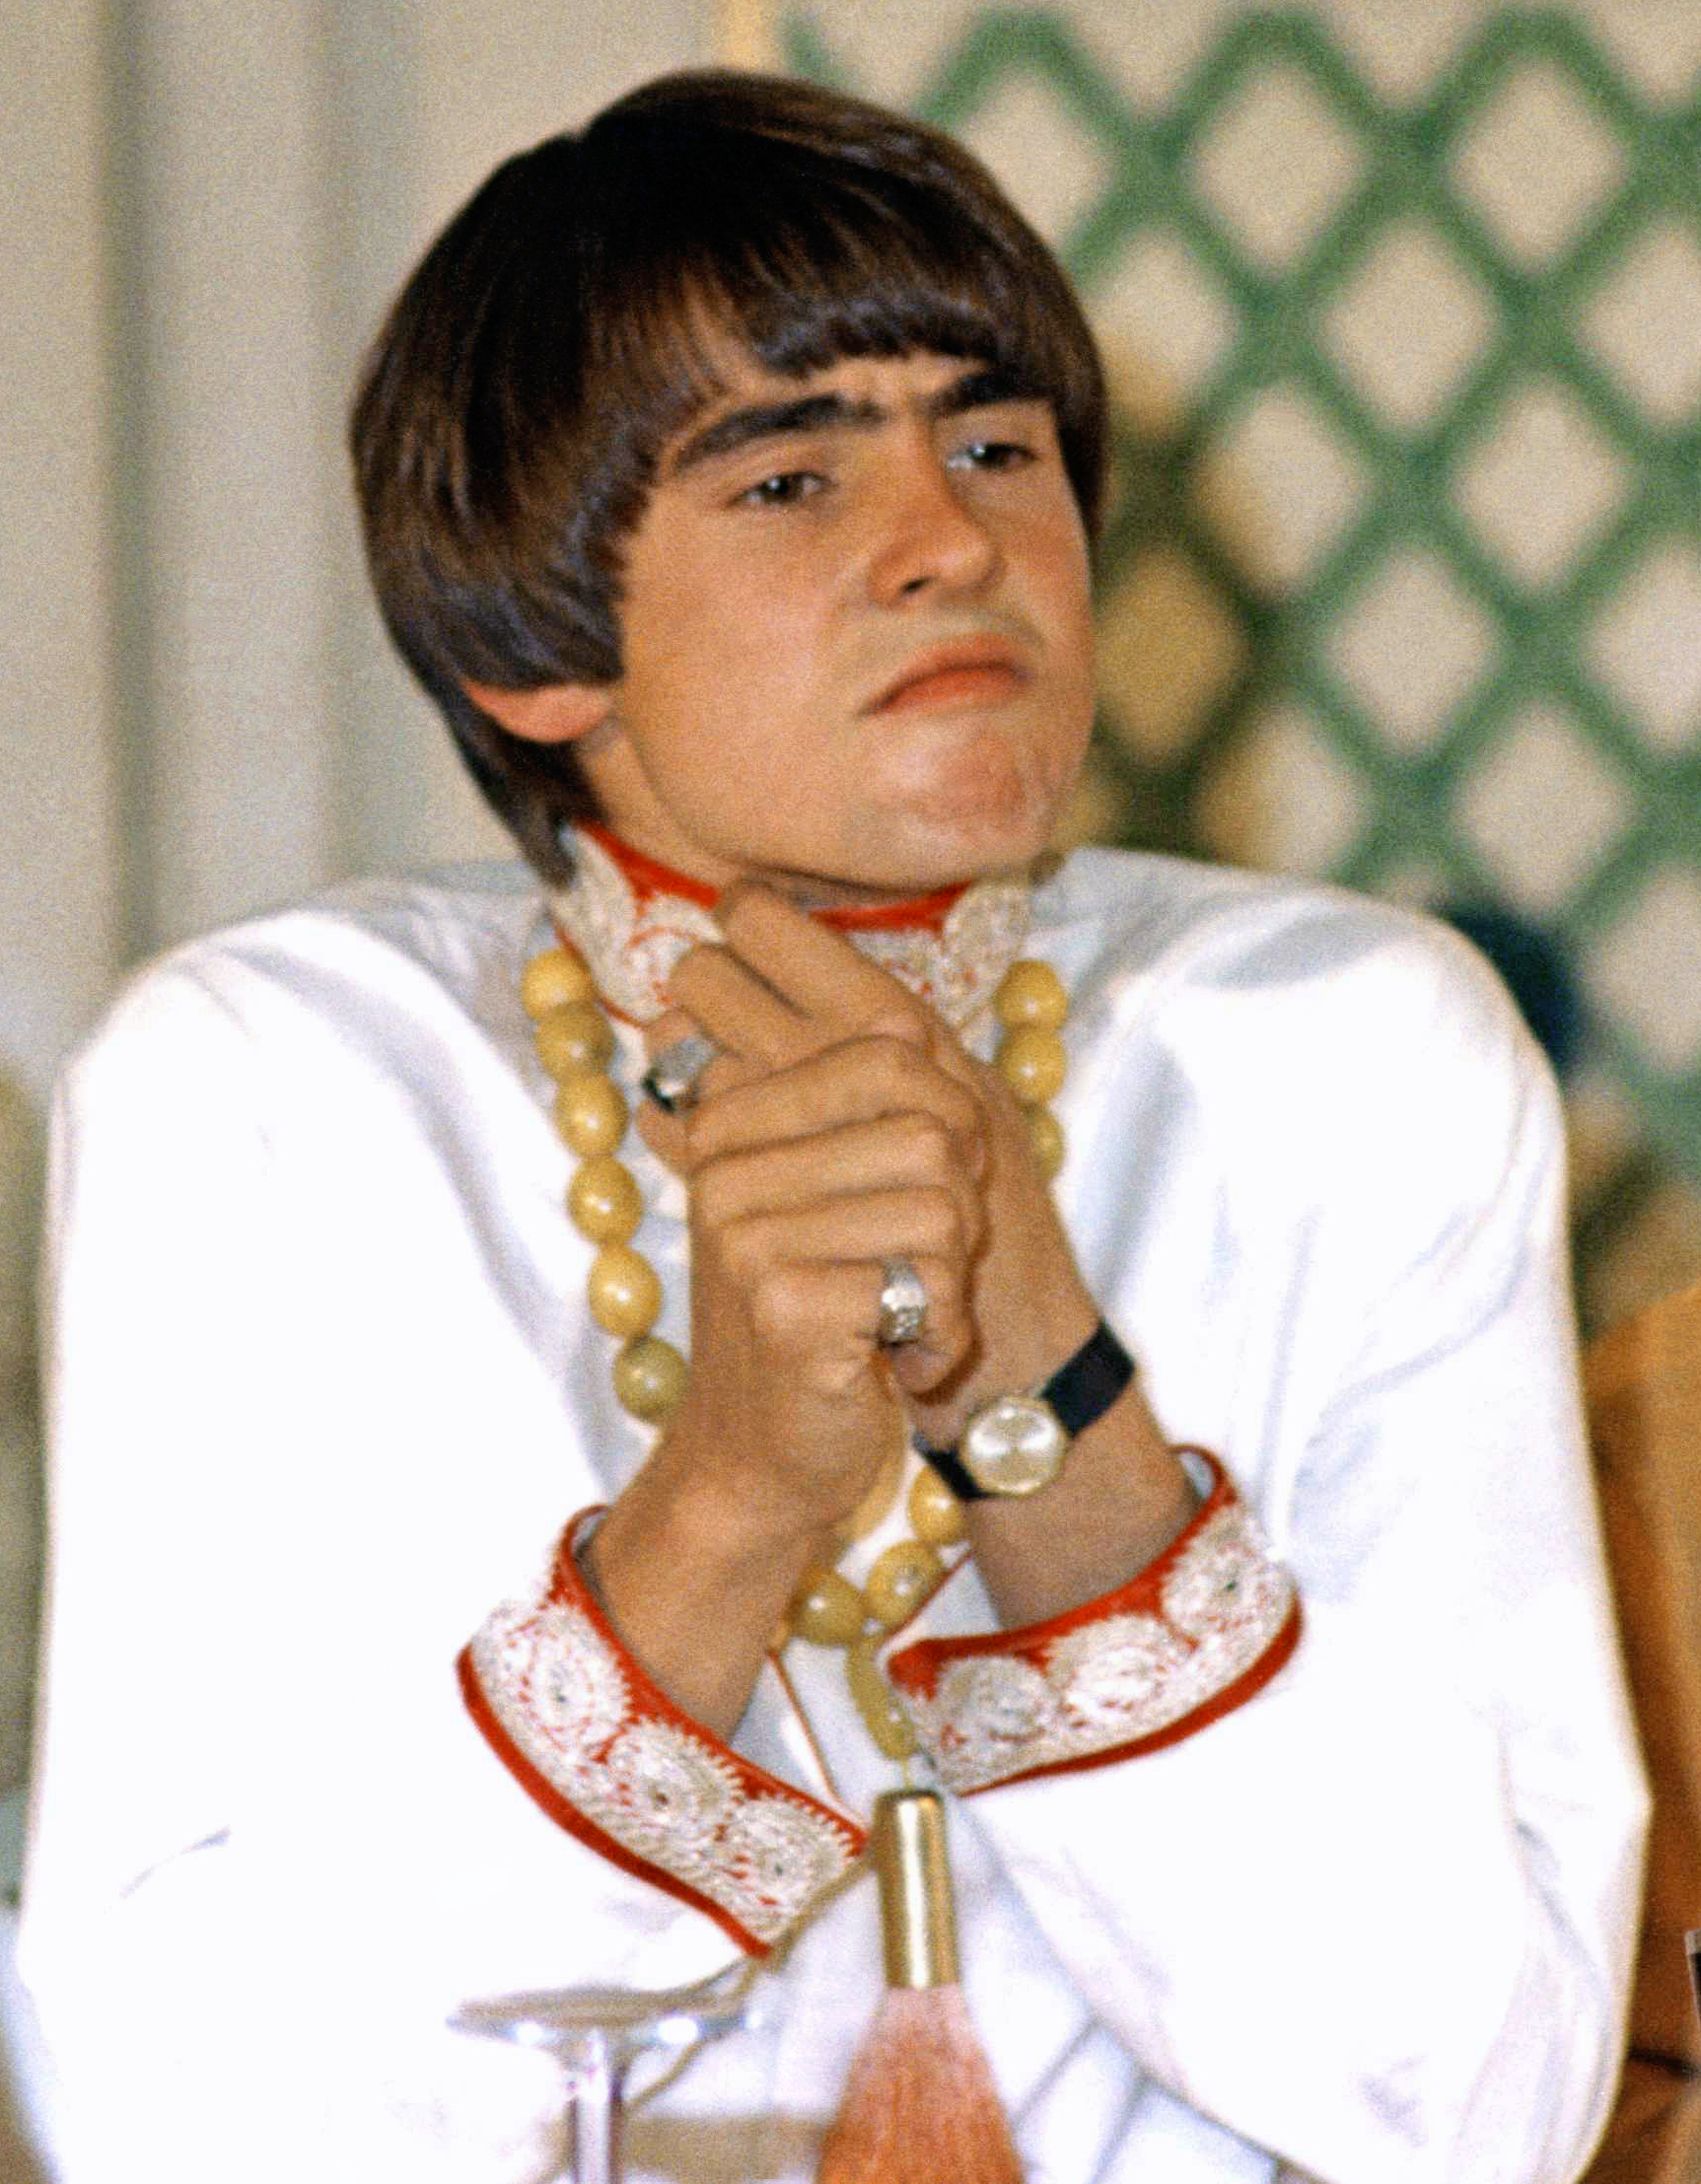 Singer Davy Jones Of The Monkees Dies In Fla At 66 Washington Times